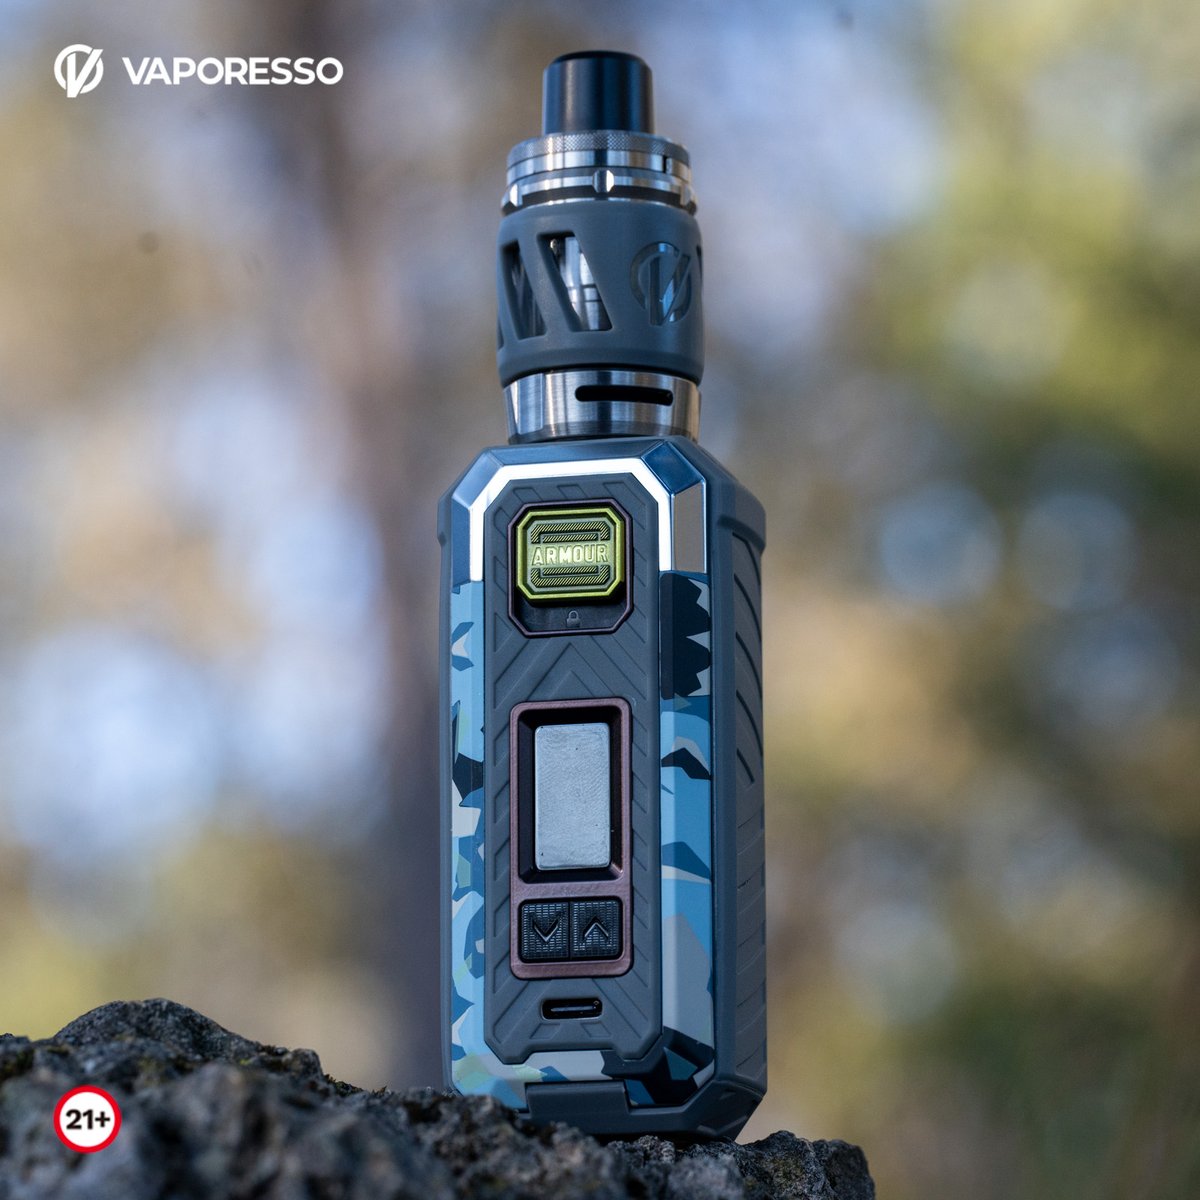 Vaporesso Armour S Kit 

😍NEW COLOURS👏

⚠ Warning: The device is used with e-liquid which contains addictive chemical nicotine. For Adult use only.

#sourcemore #sourcemoreofficial #Vaporesso #Armourskit
#vapetricks #instavape #vapecommunity #newdevices